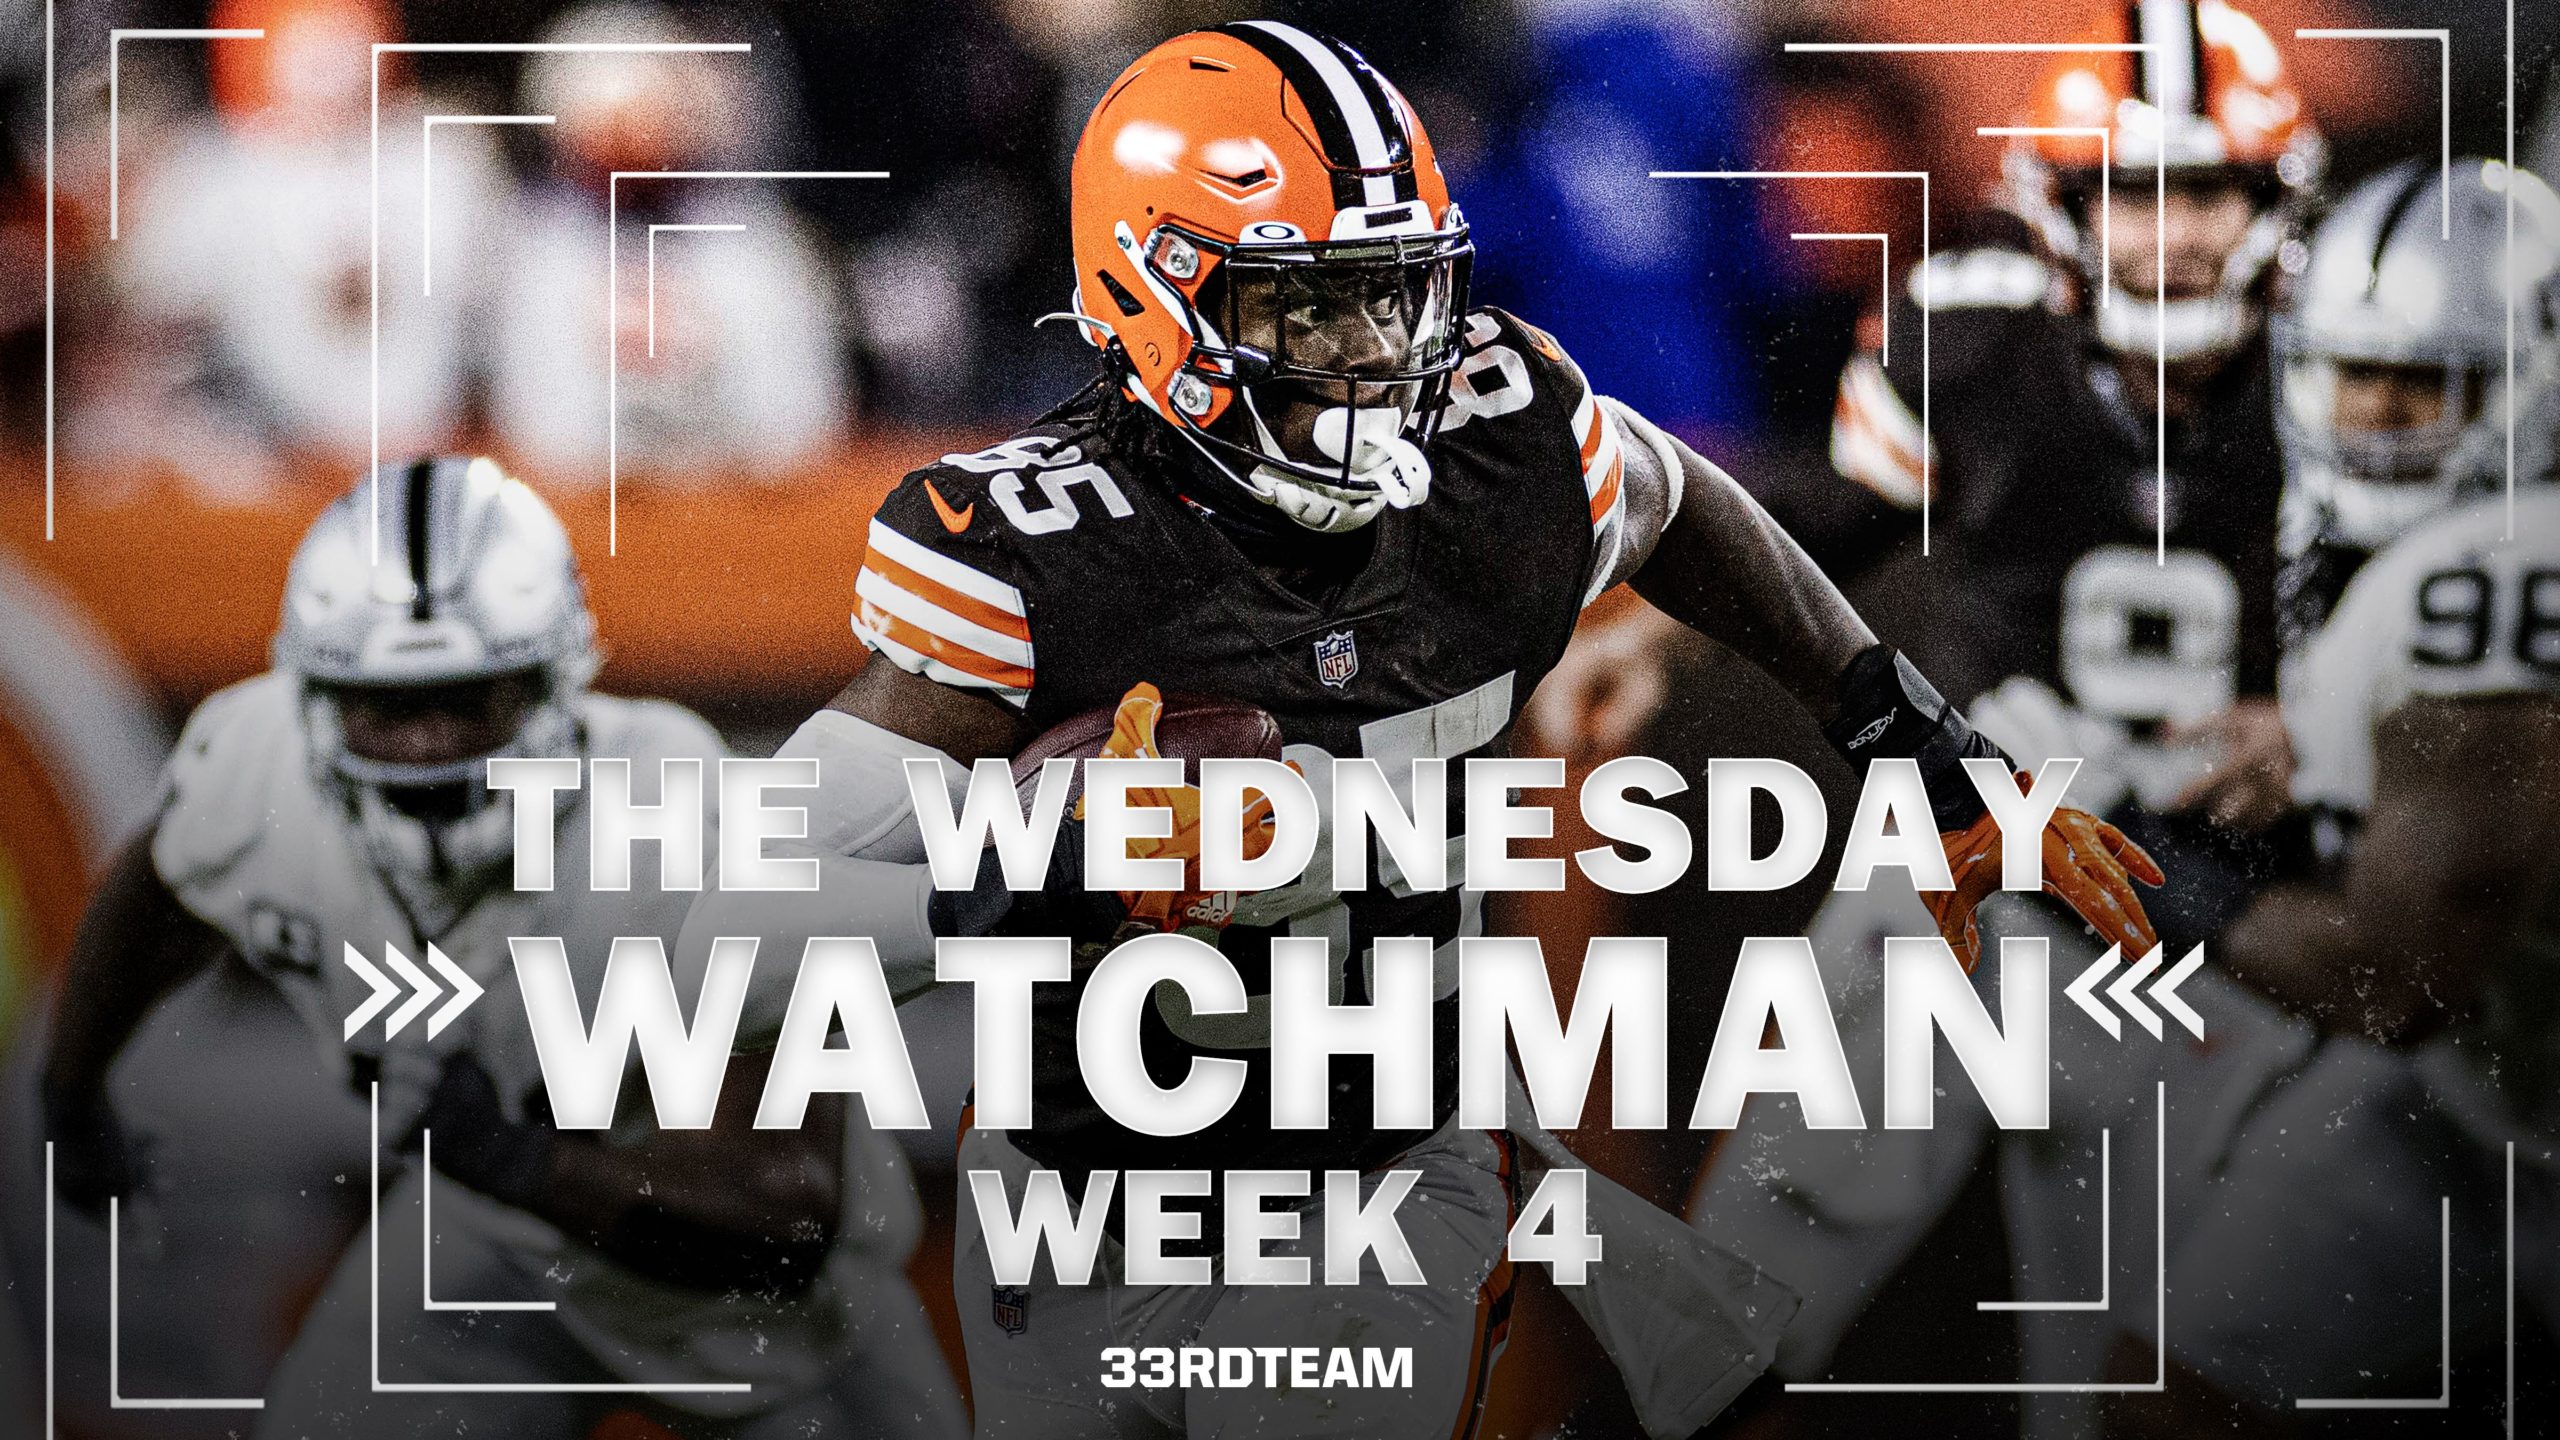 The Wednesday Watchman: Week 4 Betting, DFS Information to Know